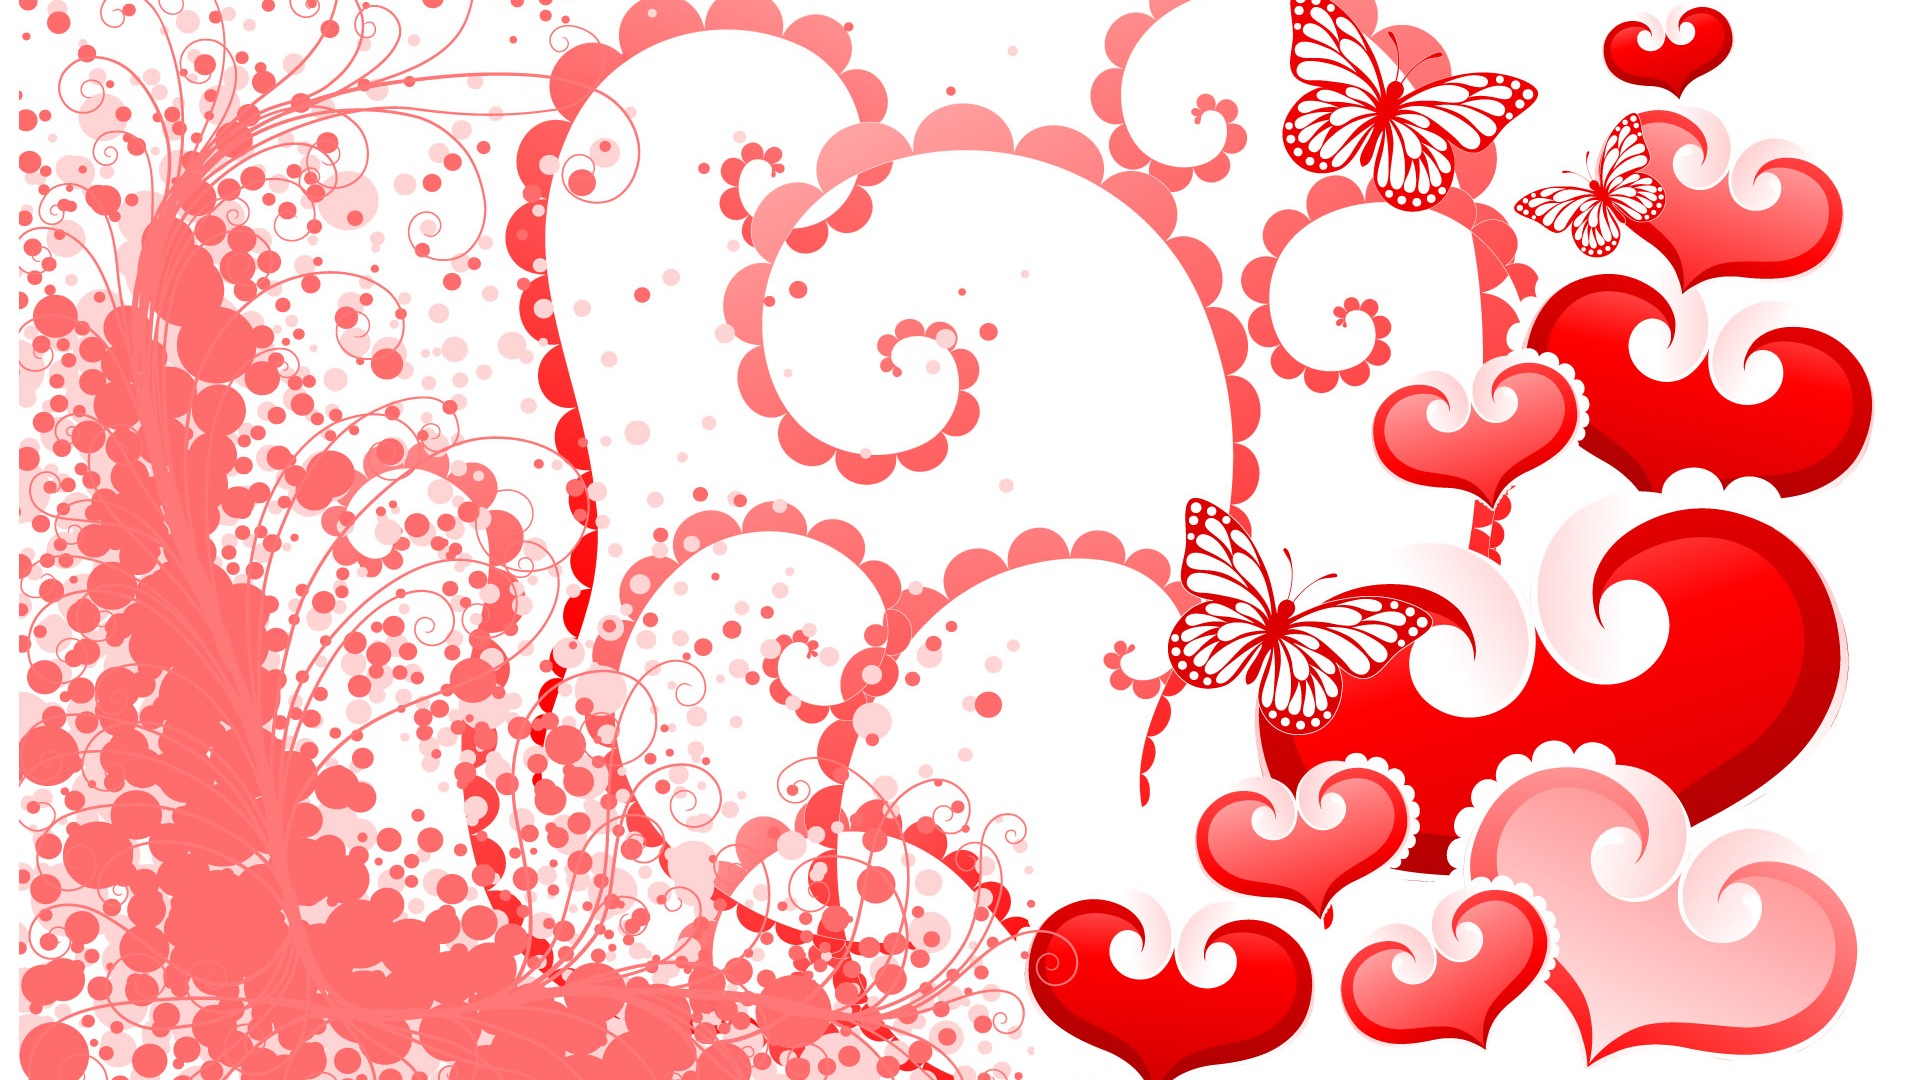 Valentine's Day Theme Wallpapers (6) #6 - 1920x1080